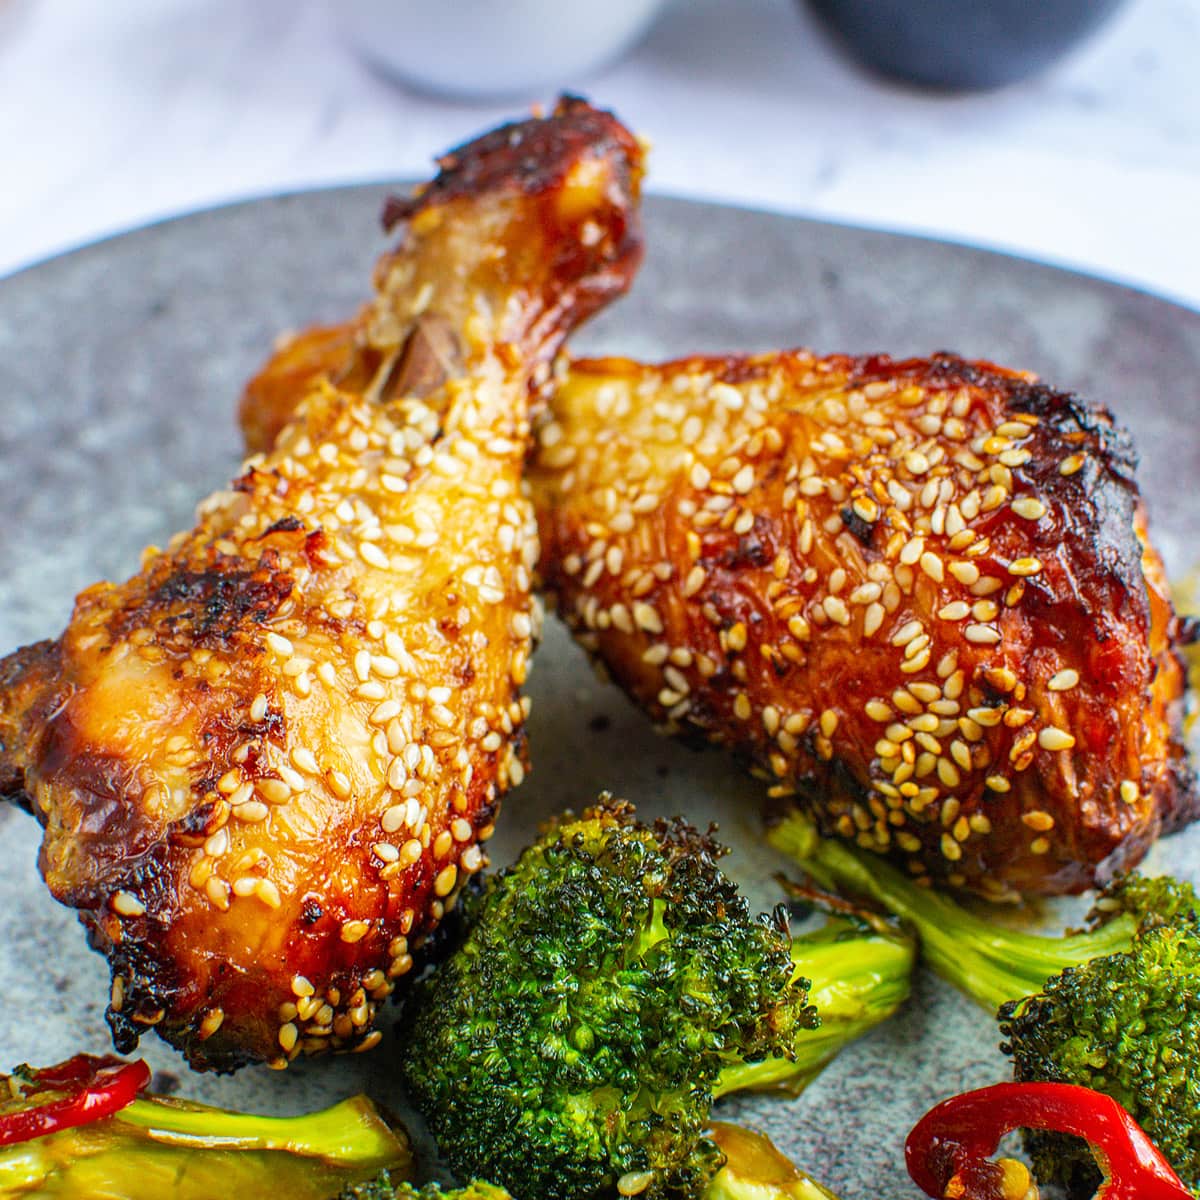 Crispy sesame chicken with broccoli on a plate.